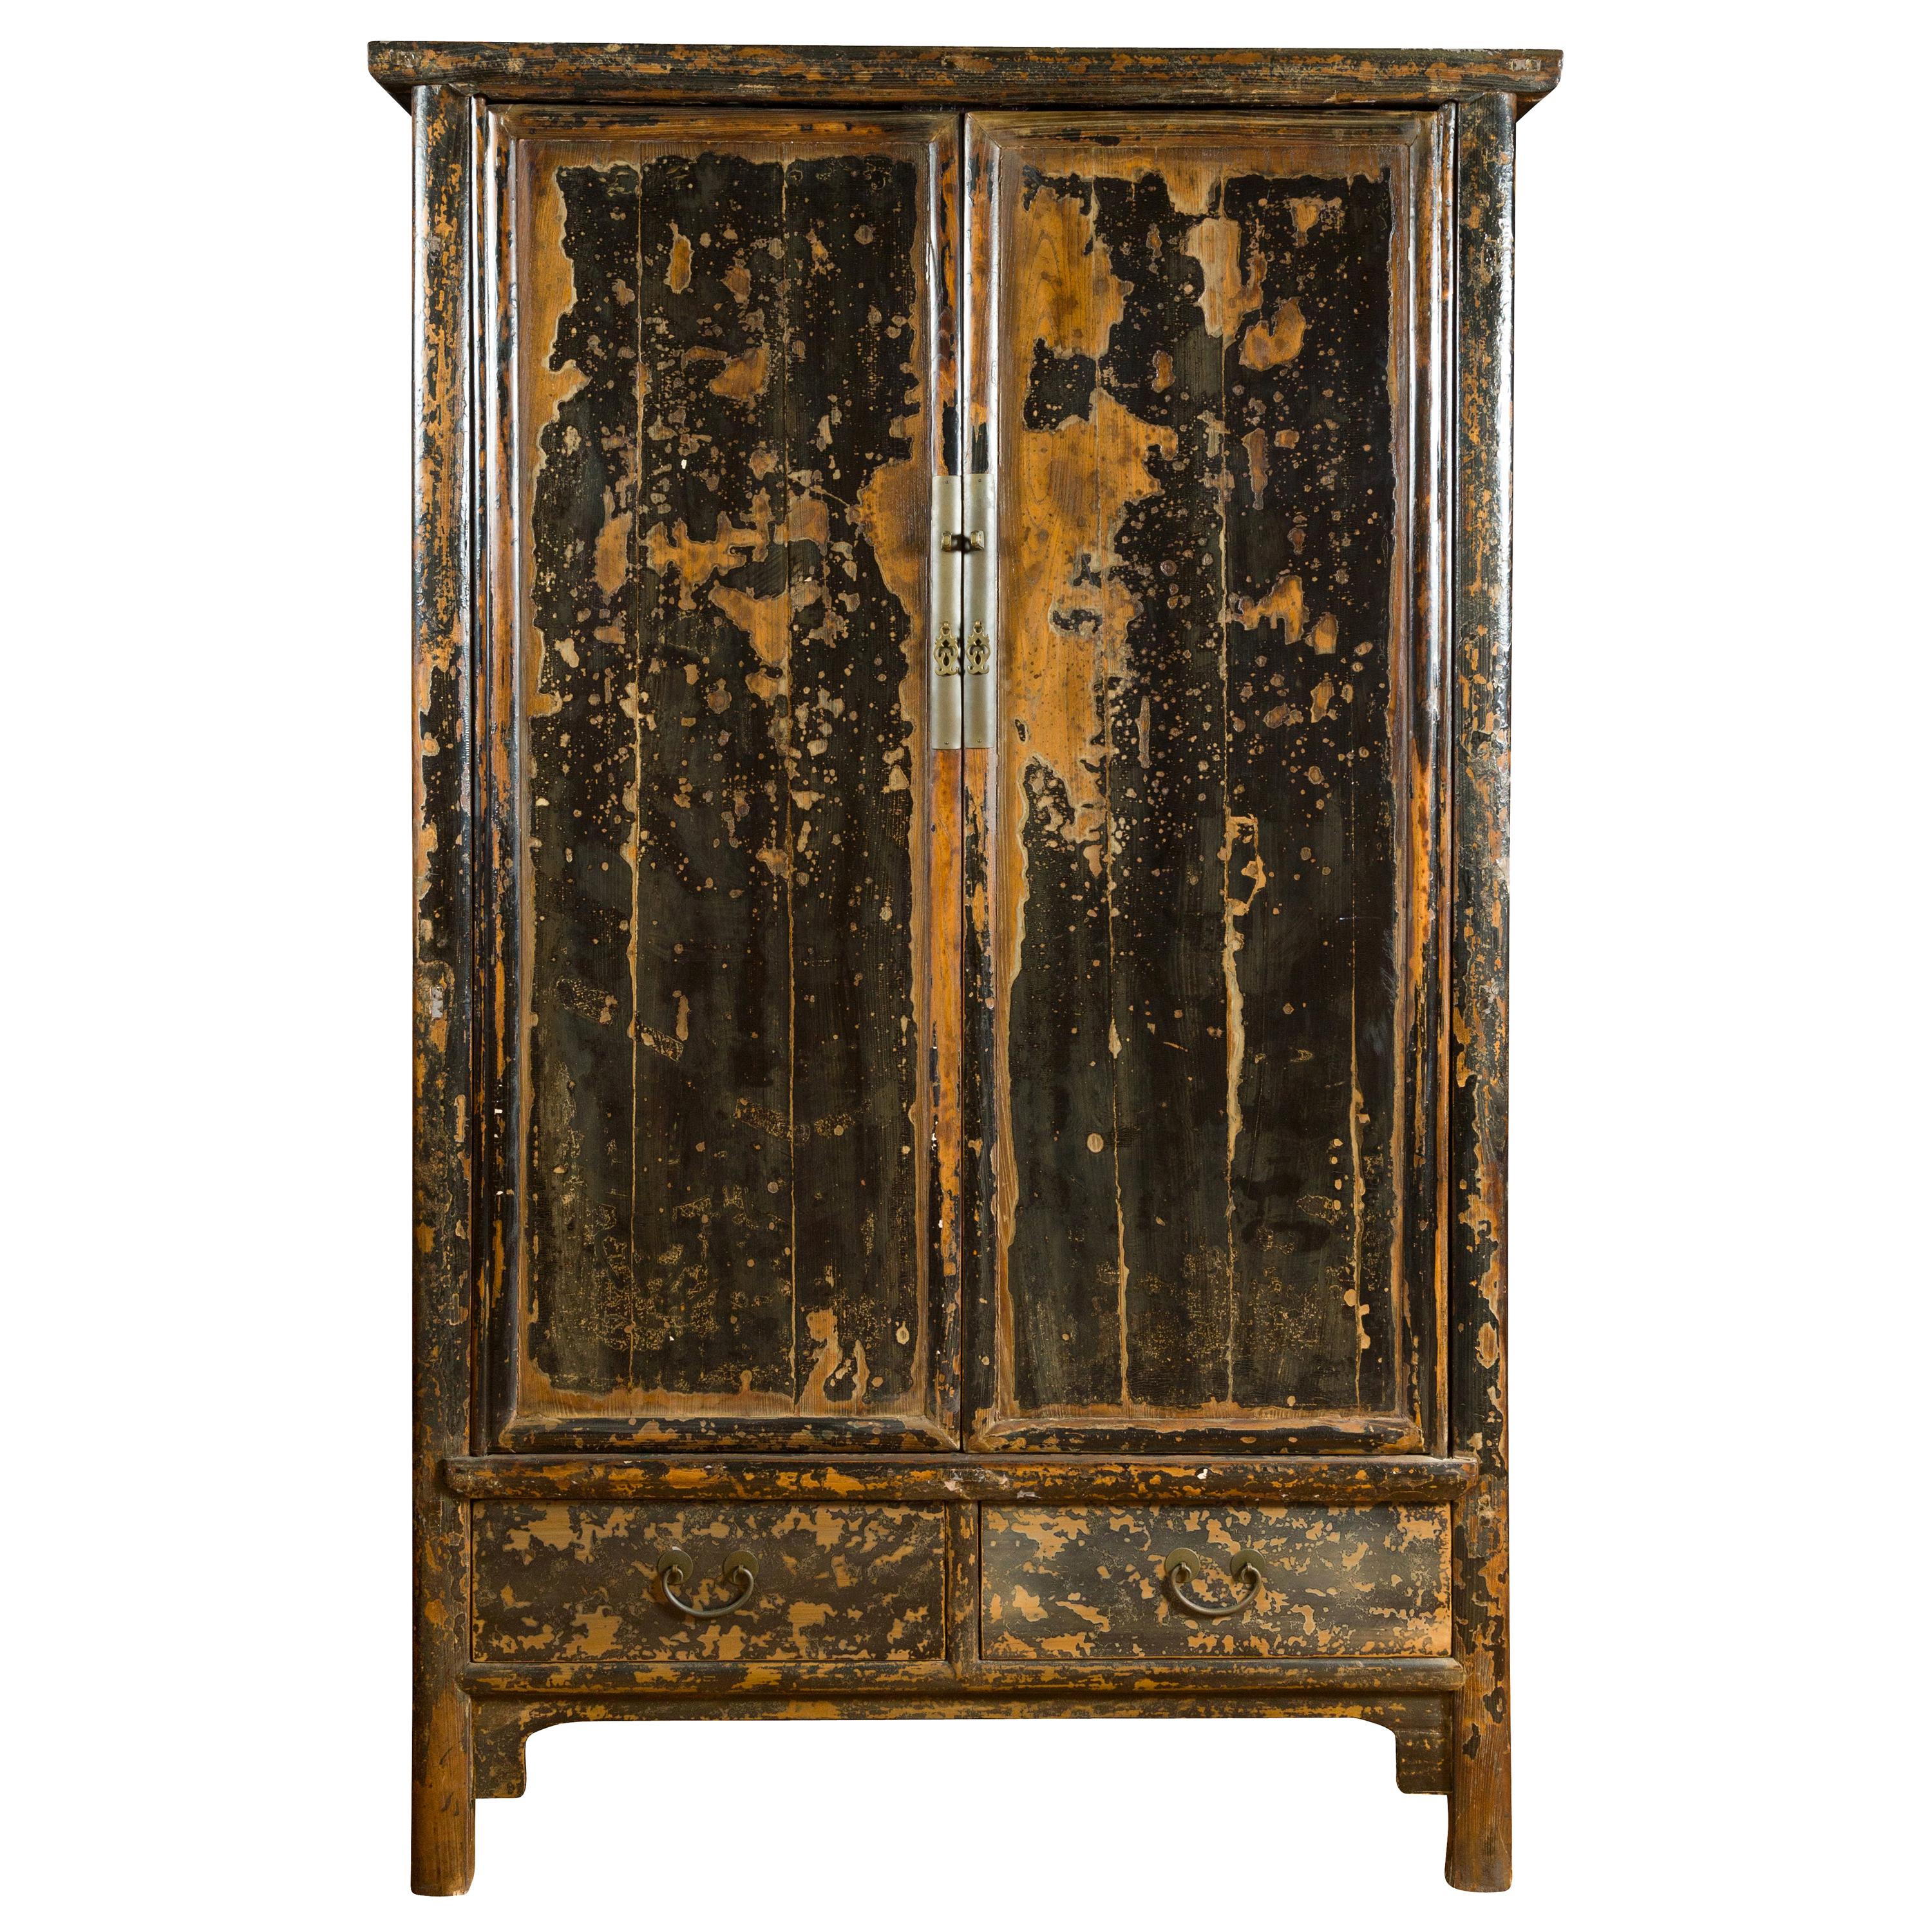 Qing Dynasty 19th Century Distressed Black Lacquer Cabinet with Original Finish